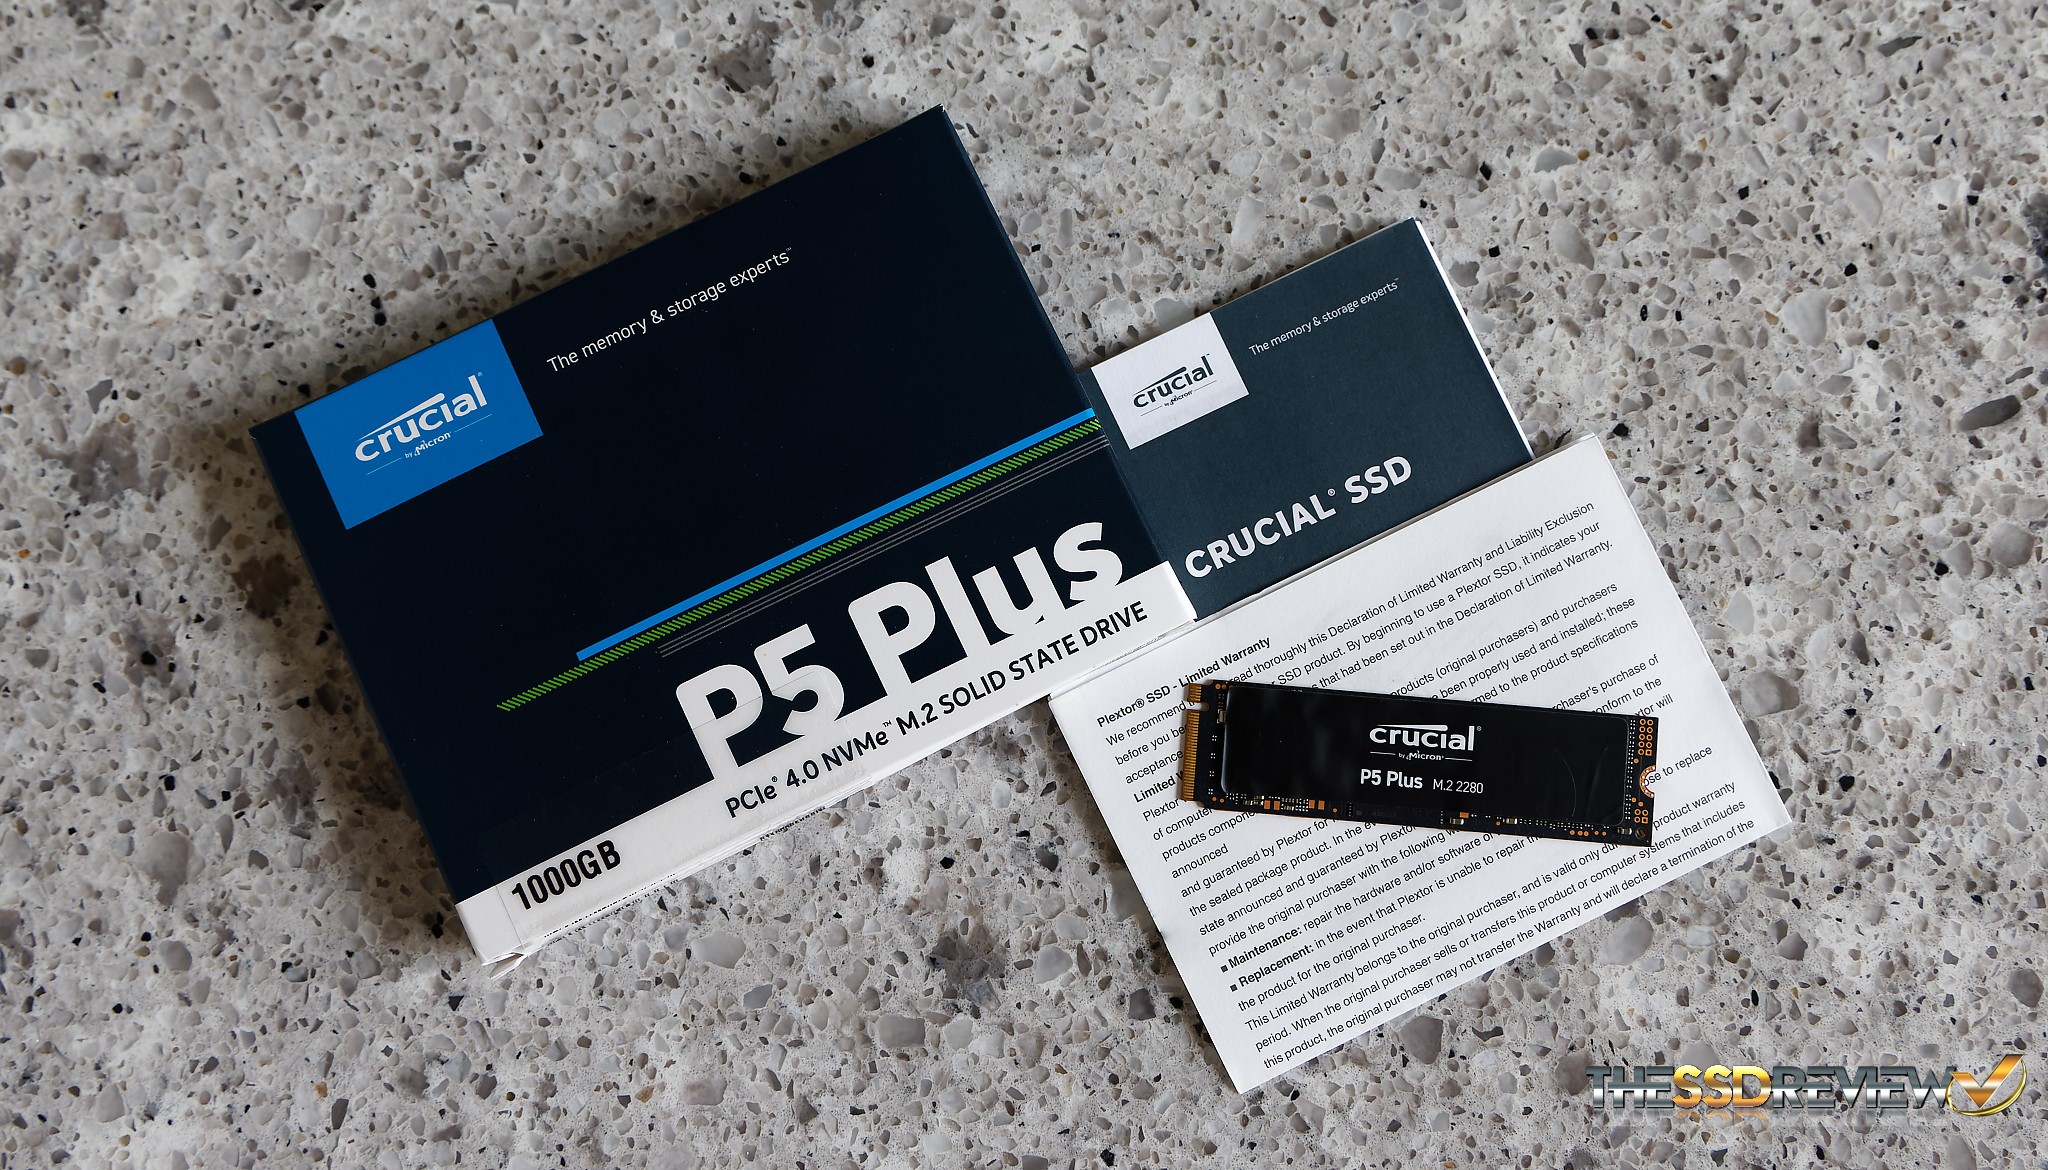 Crucial P5 Plus Review: A Solid NVMe Deal